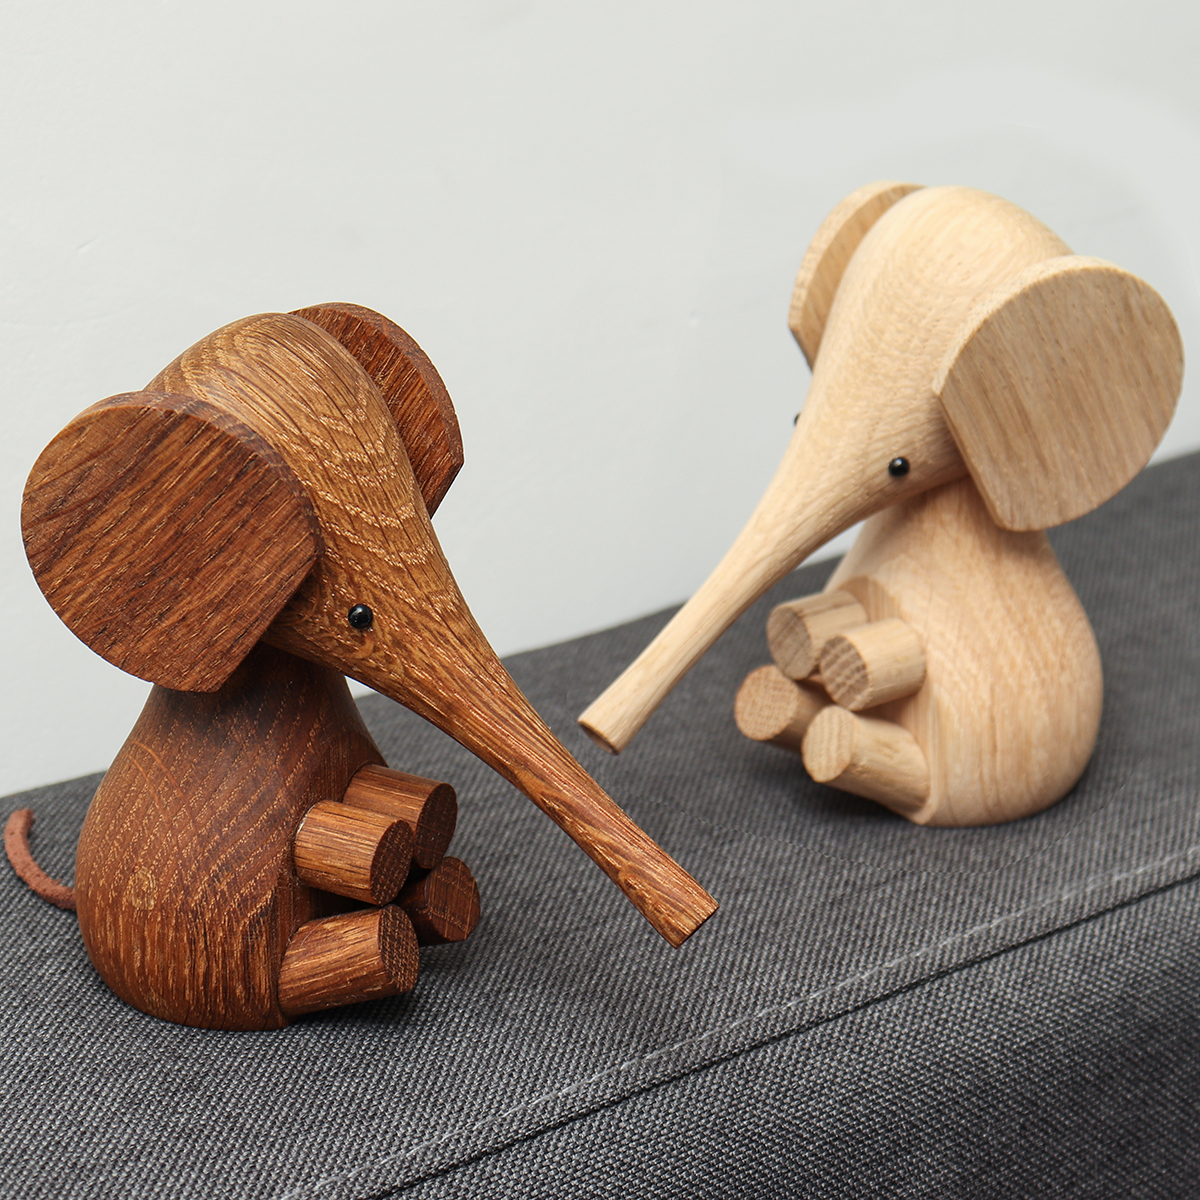 Adjustable-Handicraft-Elephant-Wooden-Animal-Doll-Smooth-Surface-Home-Decorations-Gift-1640775-1